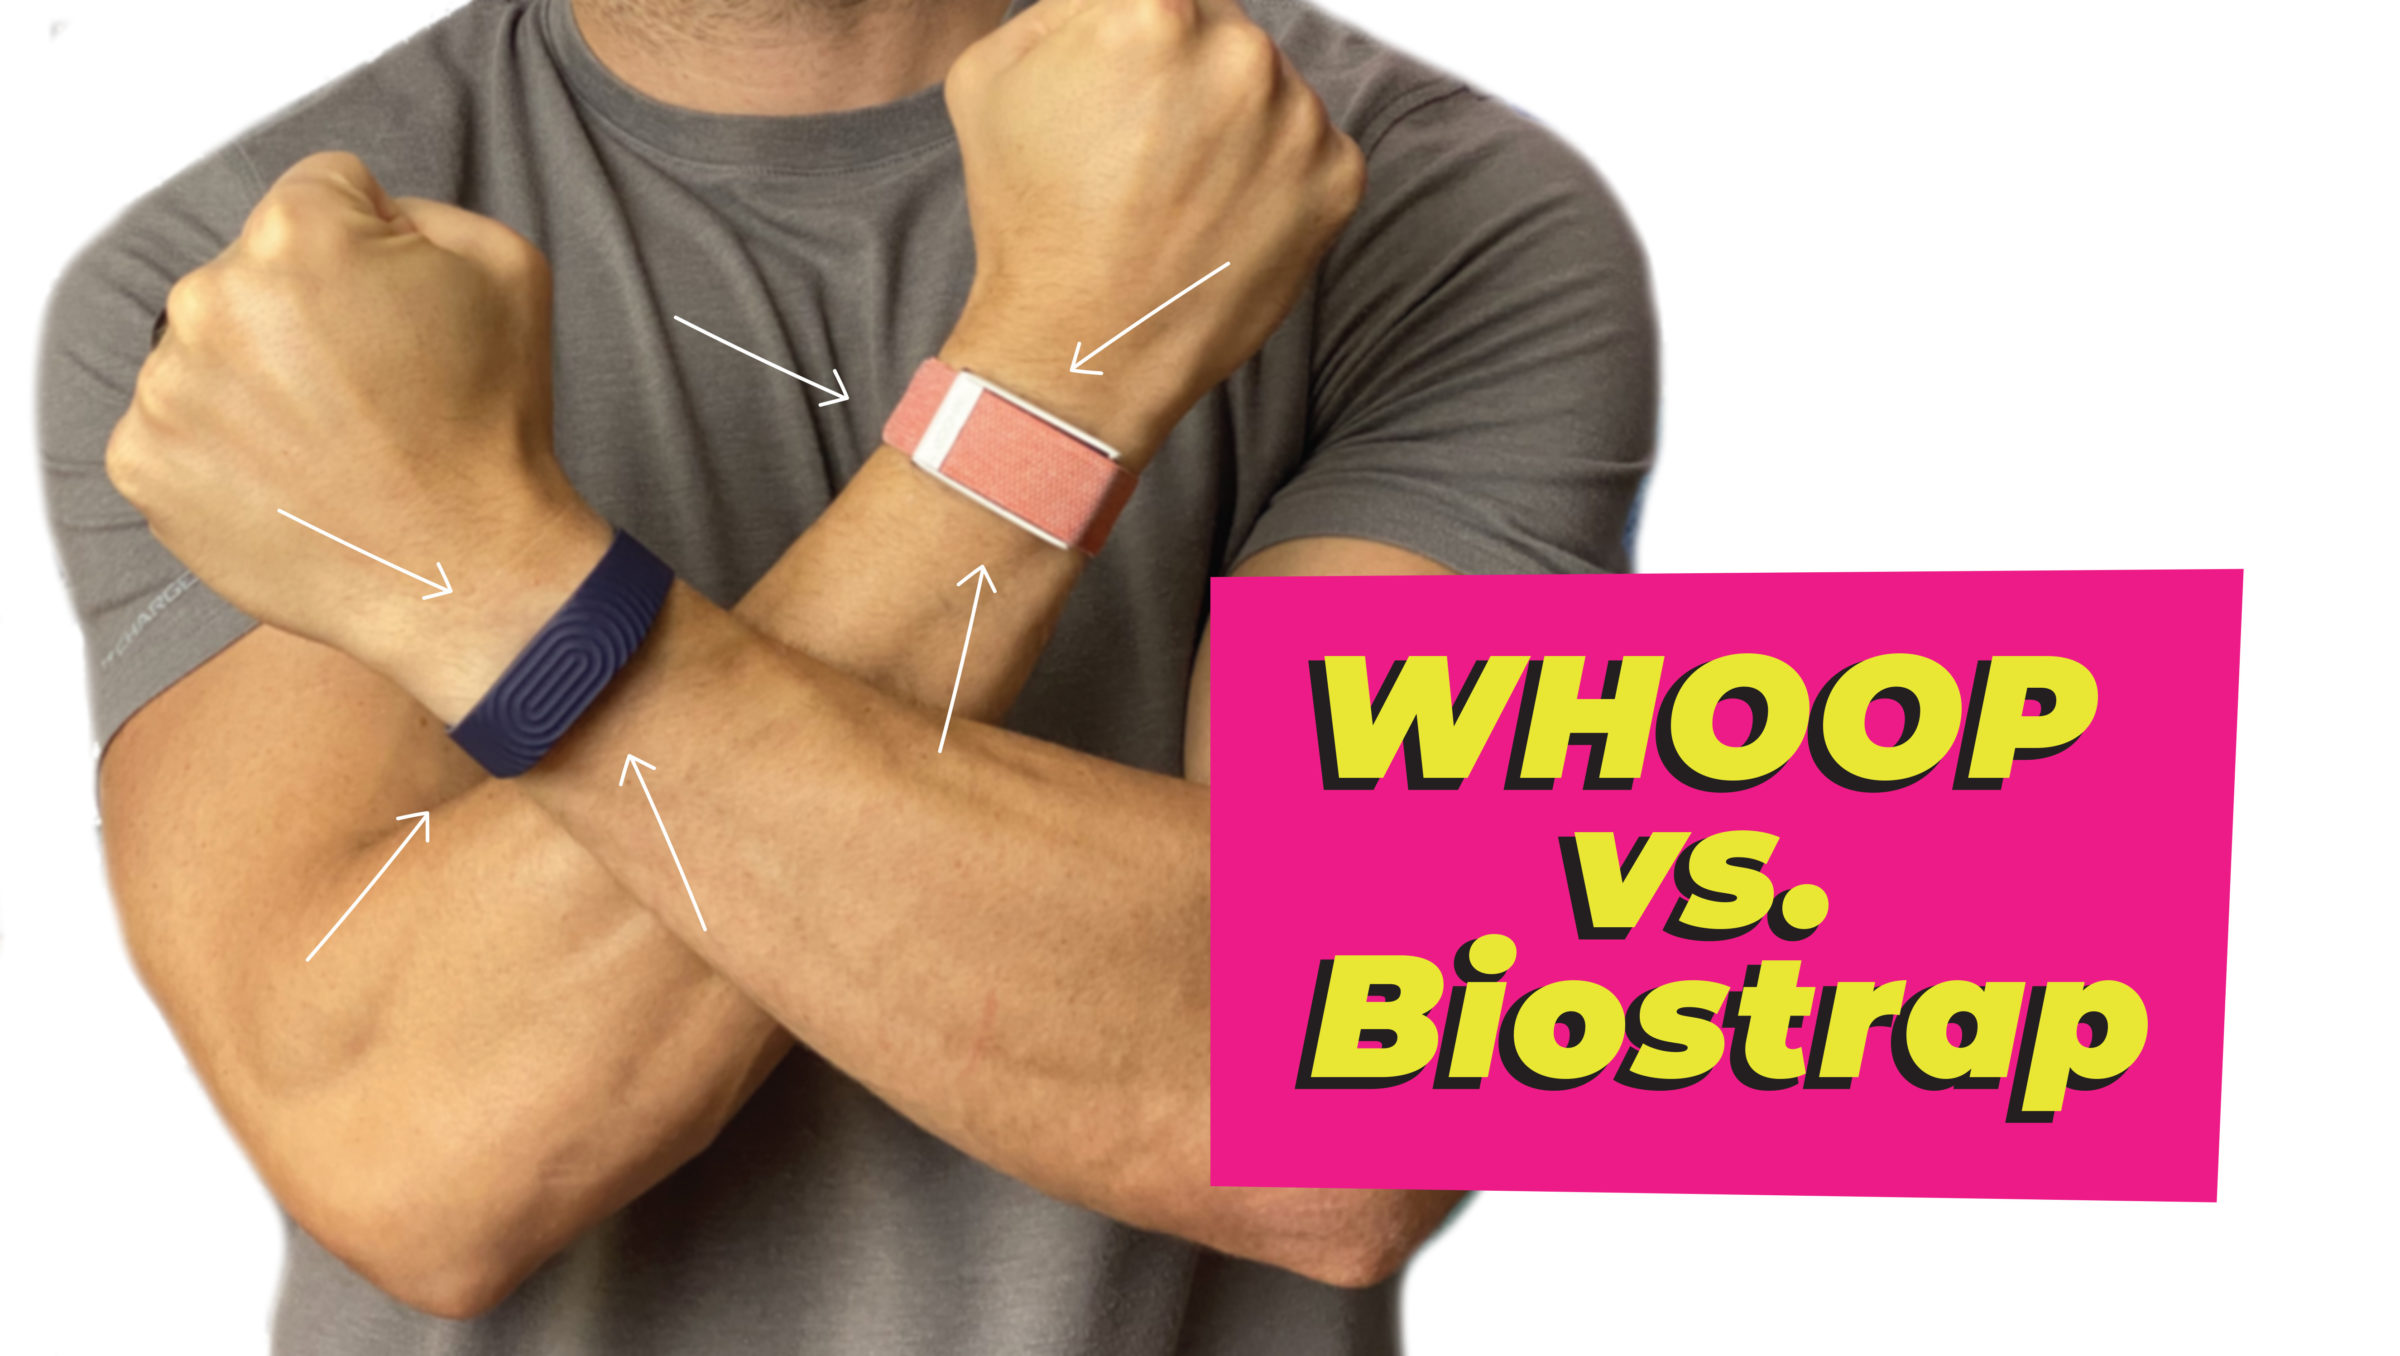 Biostrap vs. WHOOP Review and Comparison